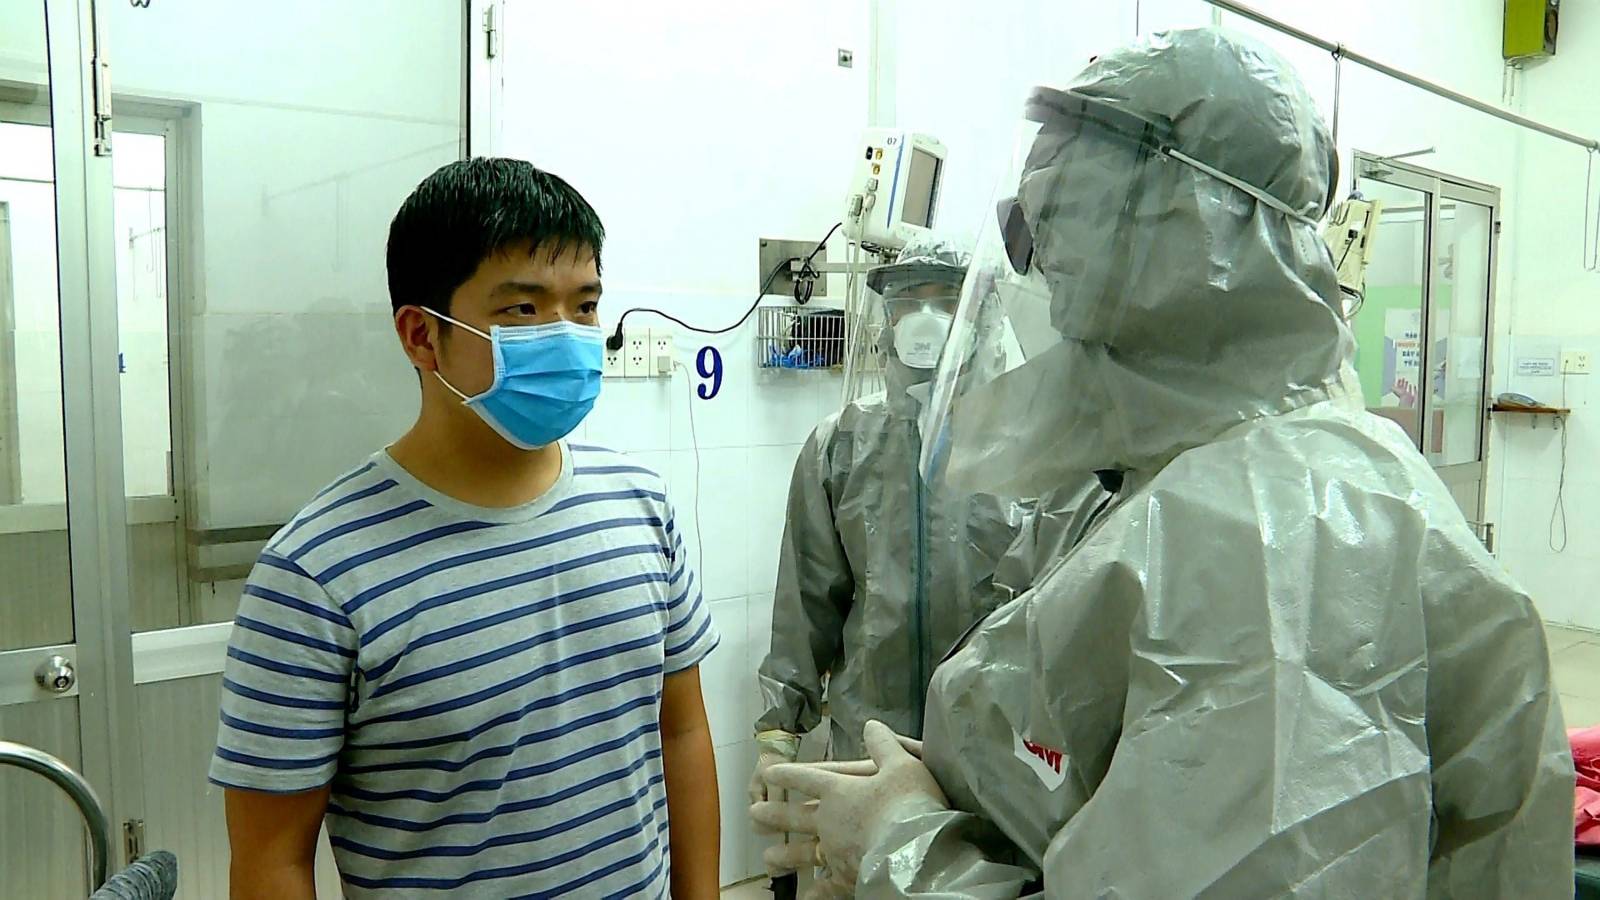 Vietnam's Vice Minister of Health Nguyen Truong Son talks with a man at an isolated section of a hospital where two Chinese citizens had tested positive for coronavirus, in Ho Chi Minh city